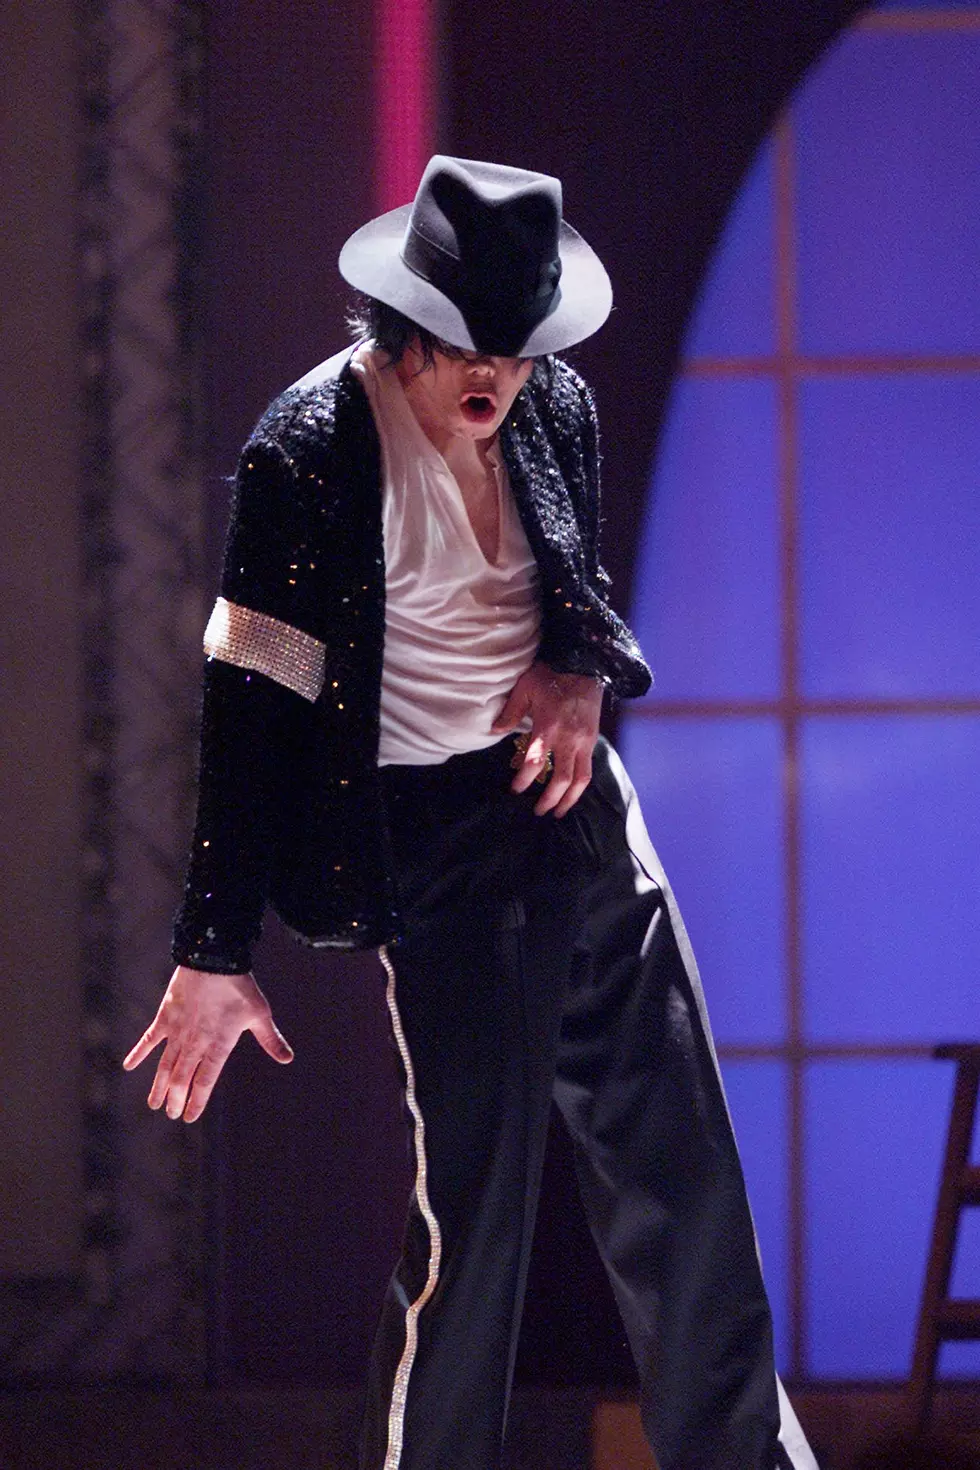 Remembering Michael Jackson’s Dance Moves 5 Years After His Death